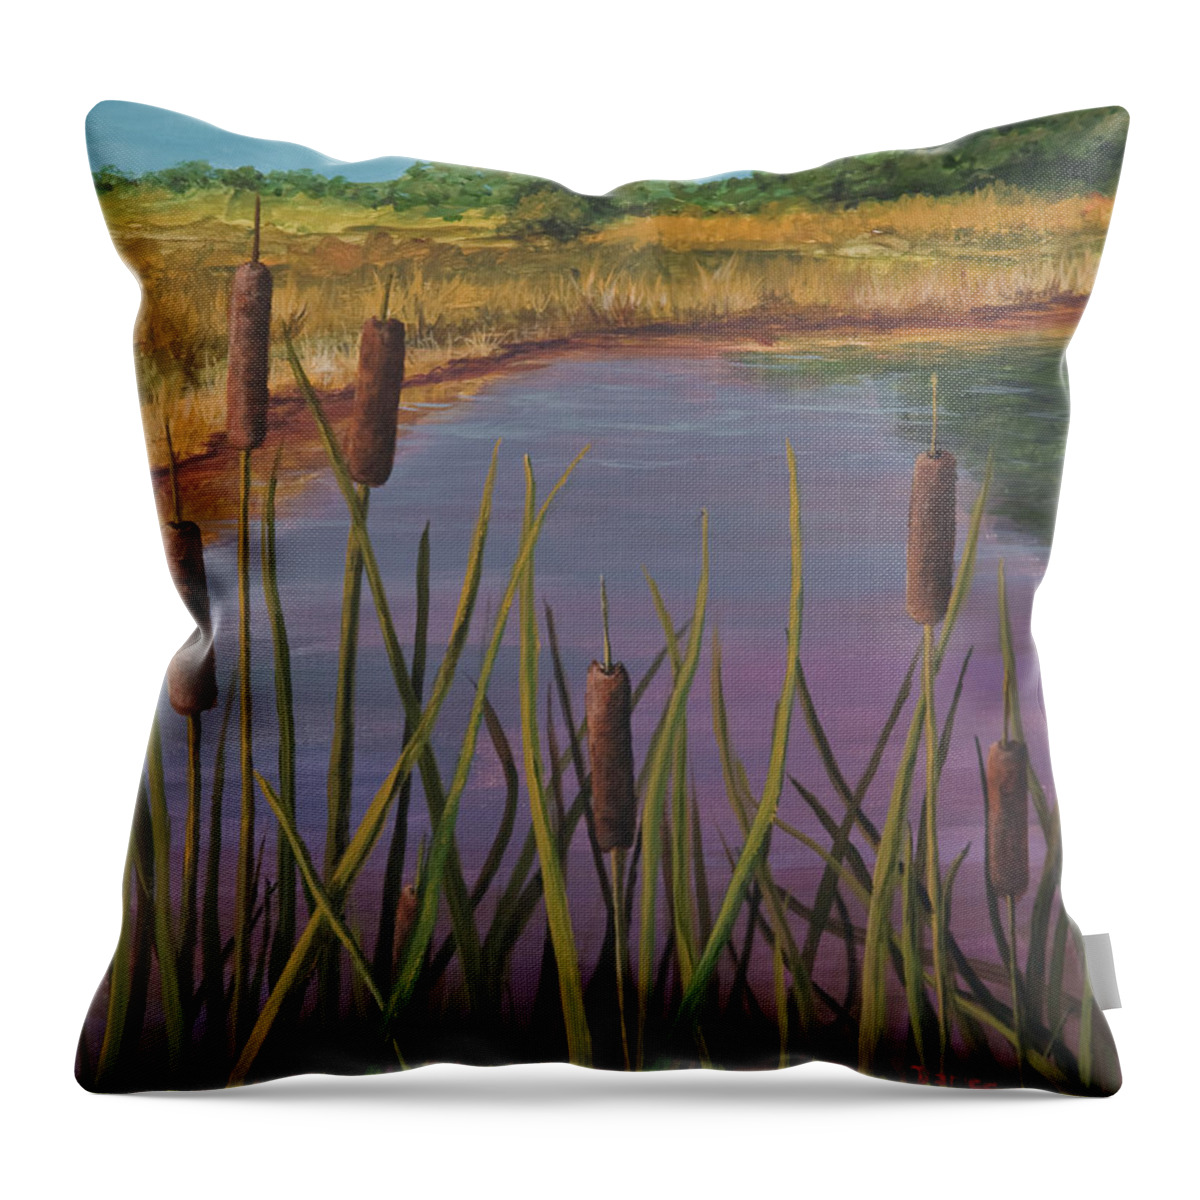 Landscape Throw Pillow featuring the painting Cattails by Darice Machel McGuire